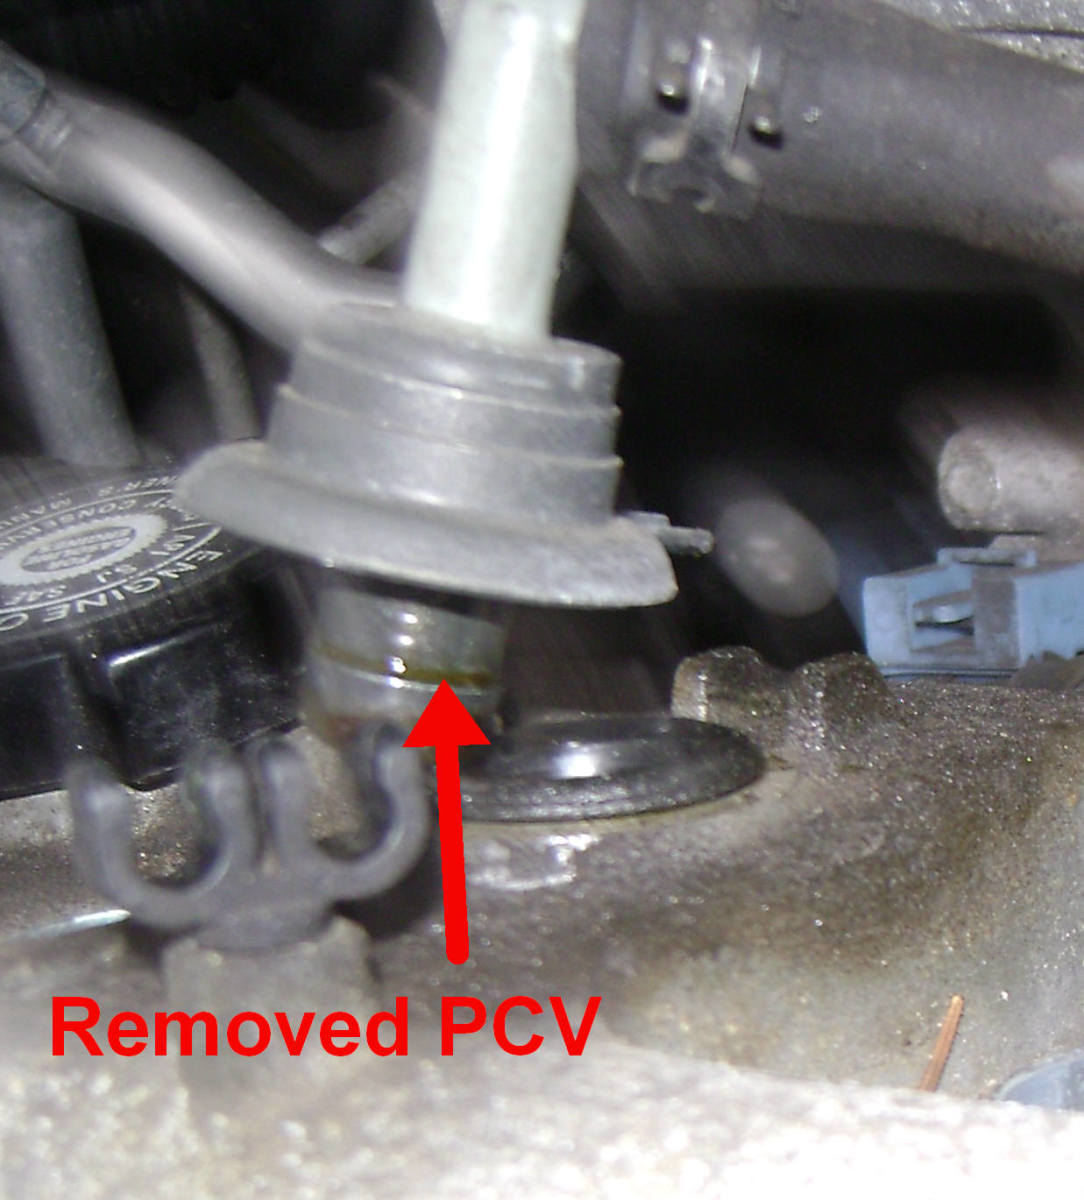 97-01-toyota-camry-spark-plug-replacement-pcv-cleaning-valve-cover-gasket-tightening